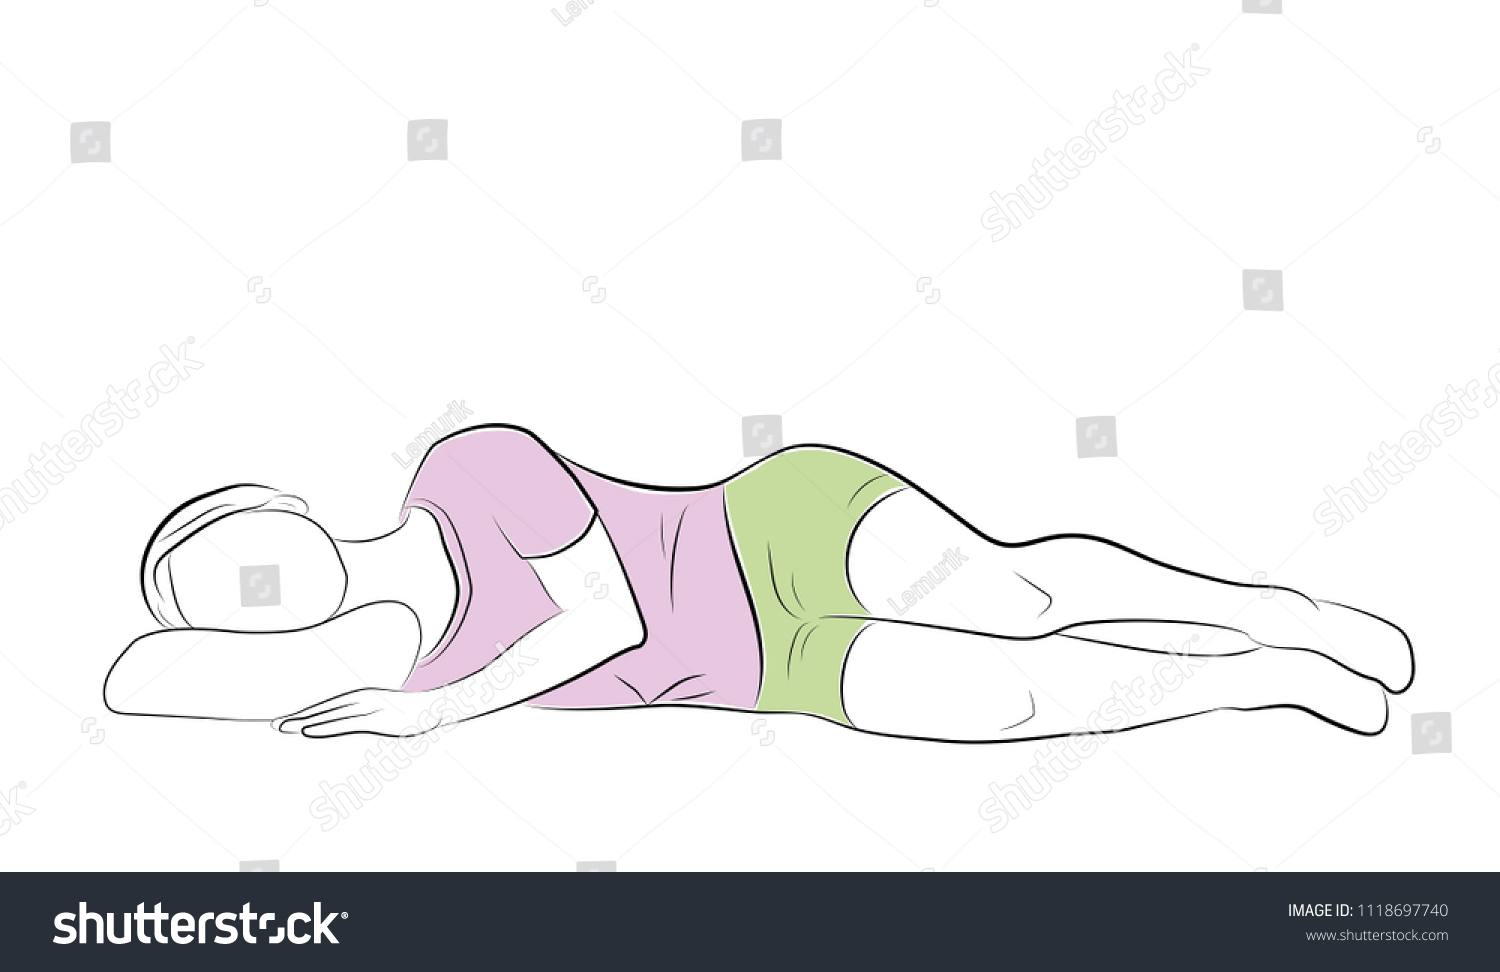 SVG of correct and incorrect sleeping position on her side. vector illustration. svg